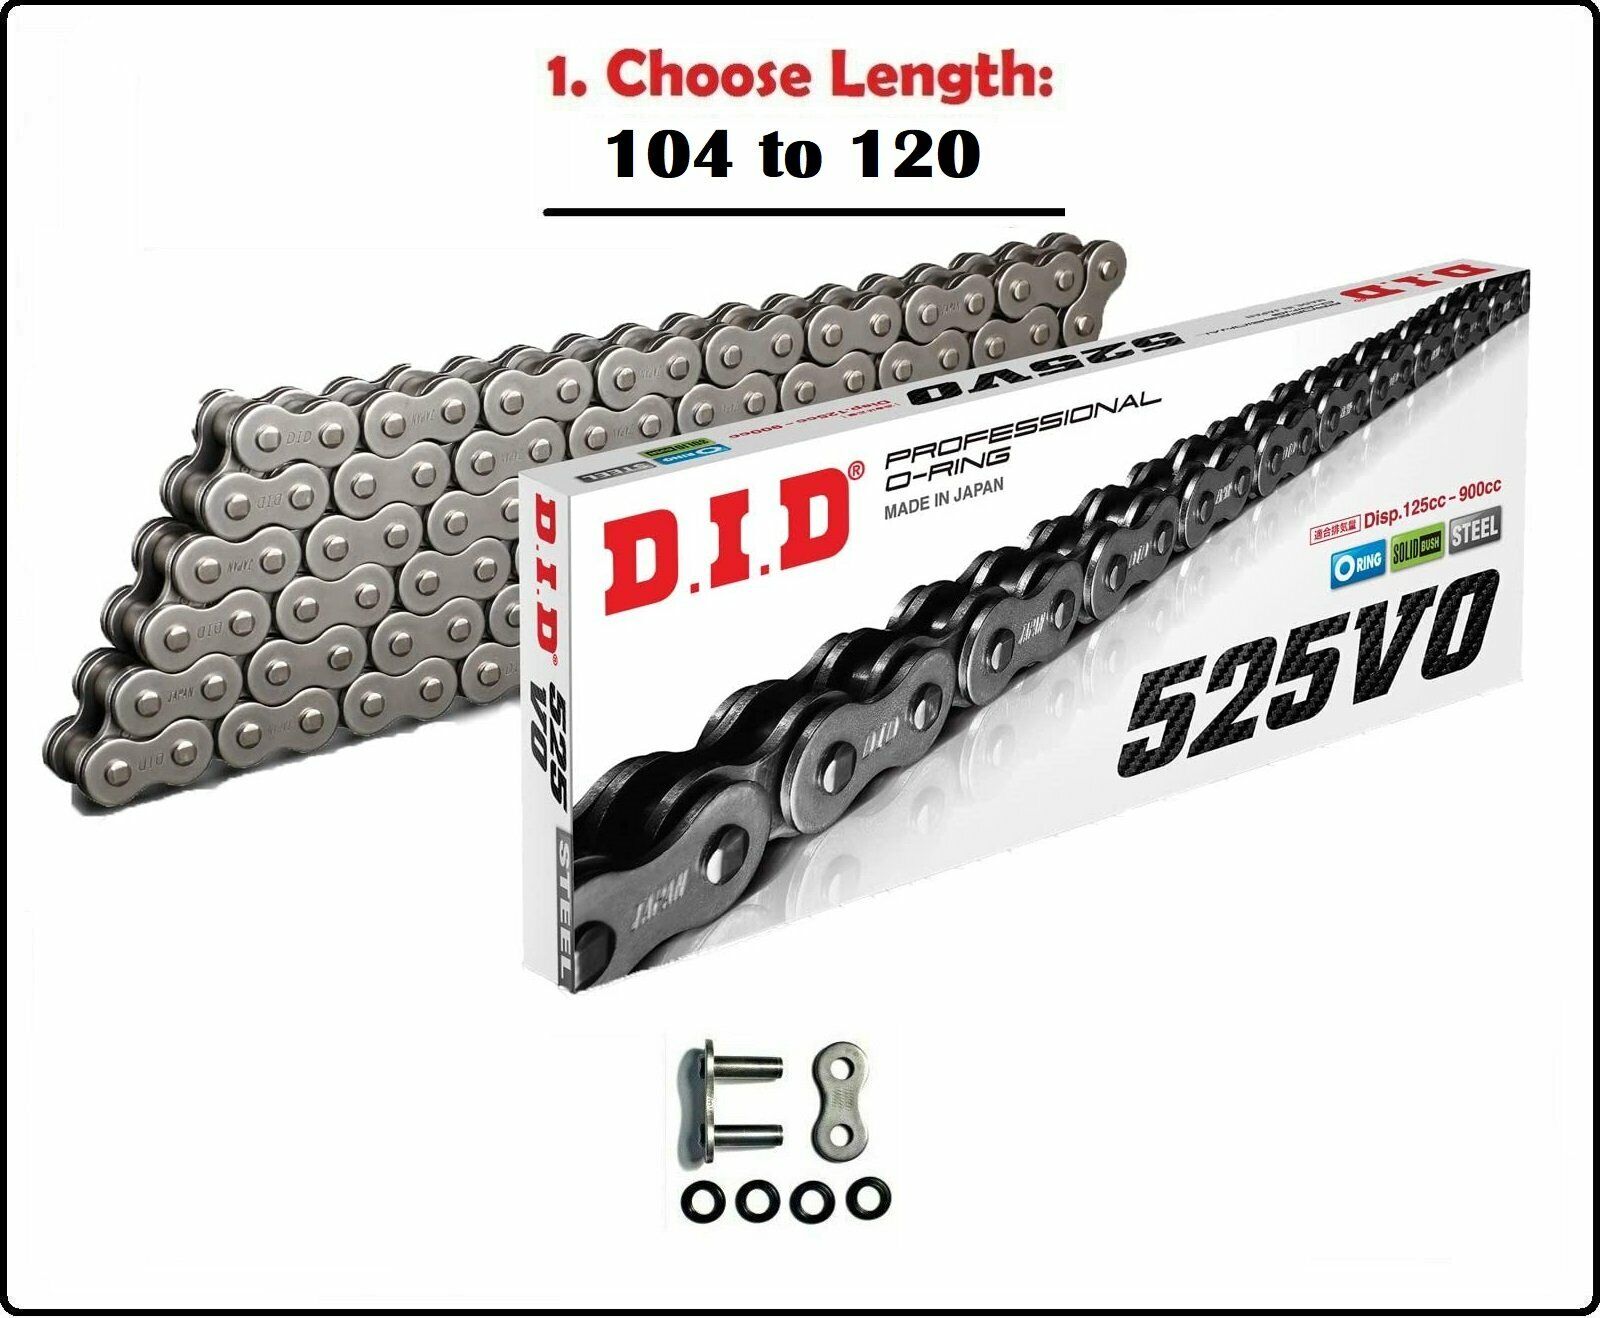 D.I.D DID 525 VO Oring Motorcycle Drive Chain Natural with Rivet Master Link